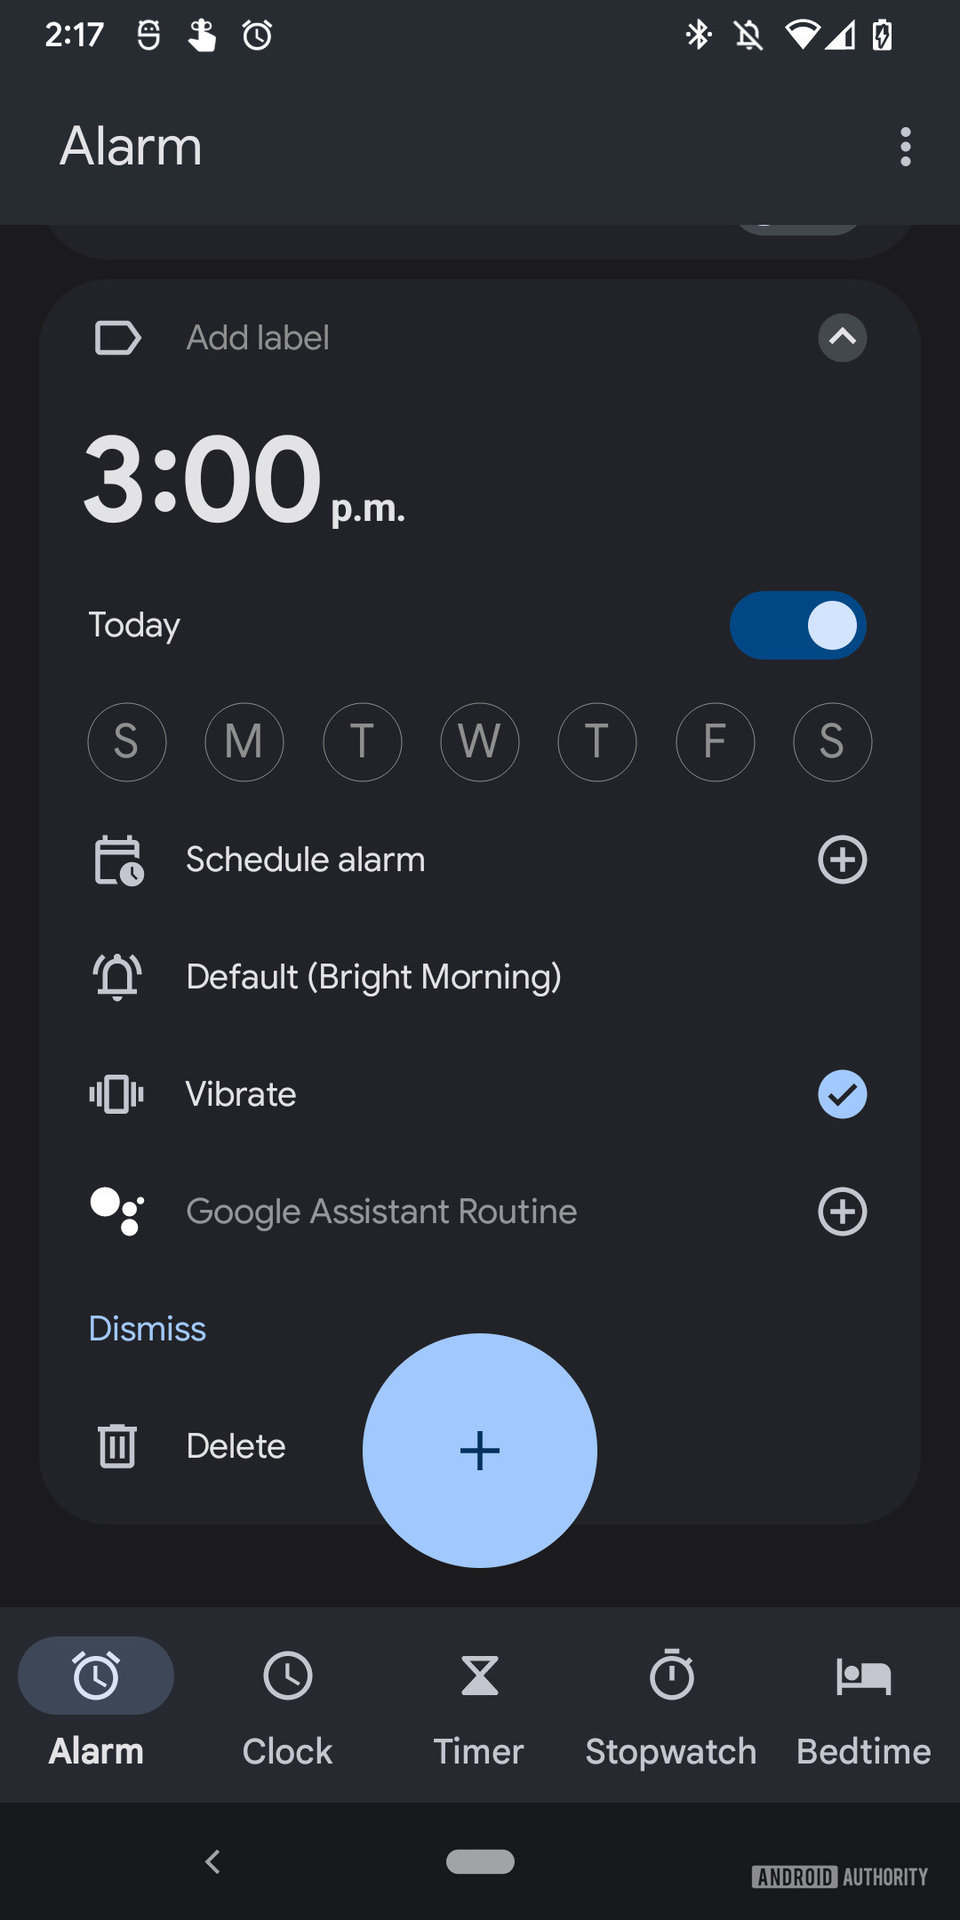 A screenshot of the Android clock app showing the process for adding a new alarm for 3:00 PM after tapping "OK" with various options to customize the alarm available including ertain days of the week, scheduling, and the choice of sounds and vibration of the alarm.